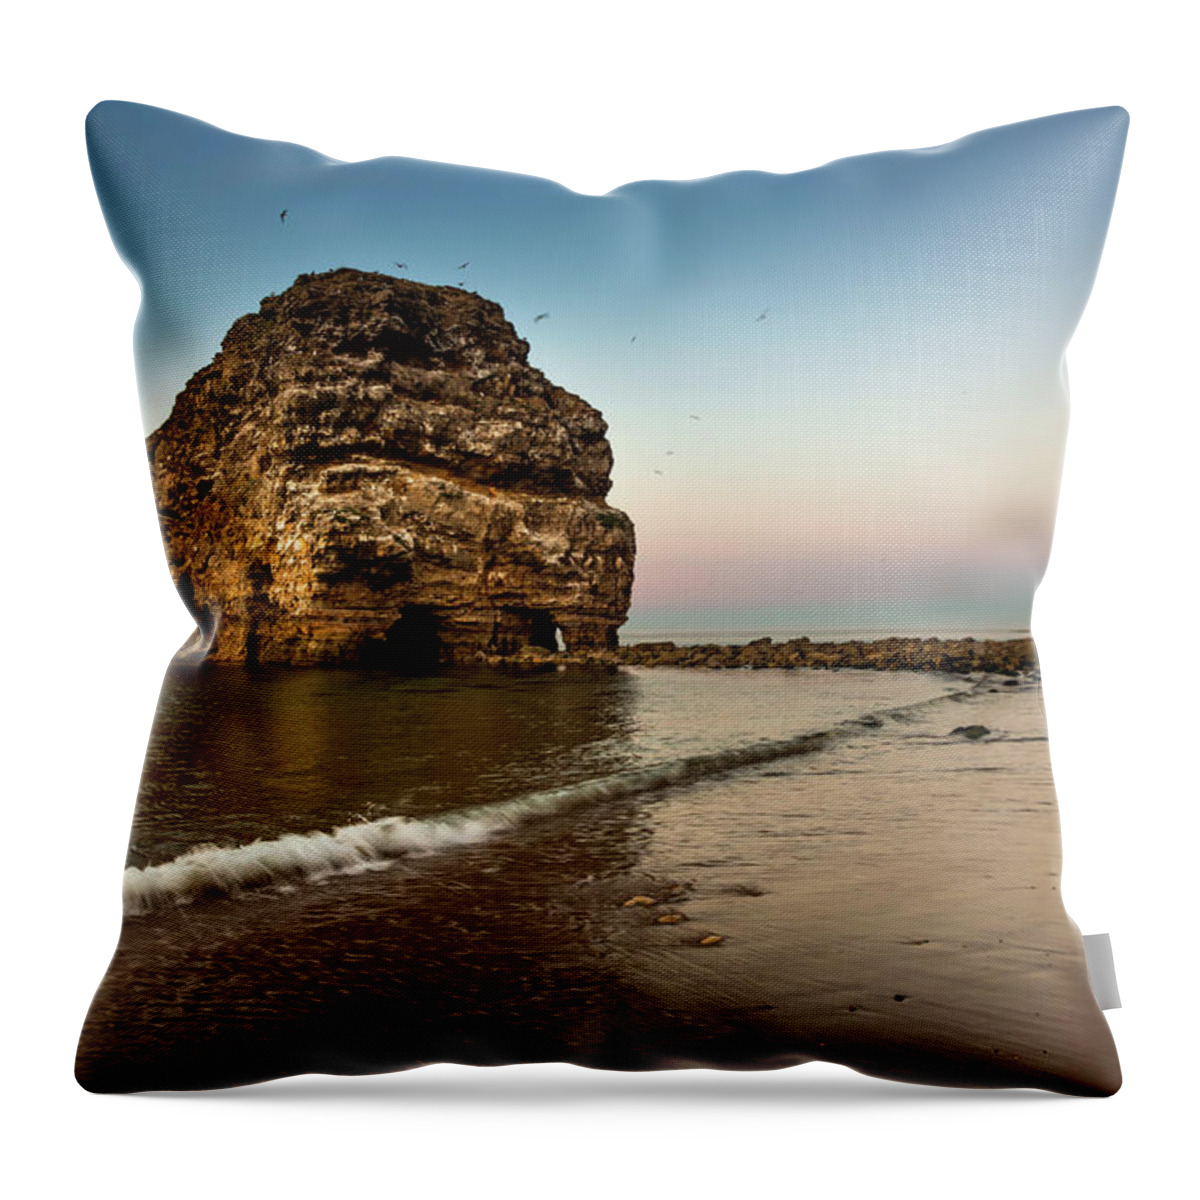 Flying Throw Pillow featuring the photograph A Large Rock Formation On The Coast by John Short